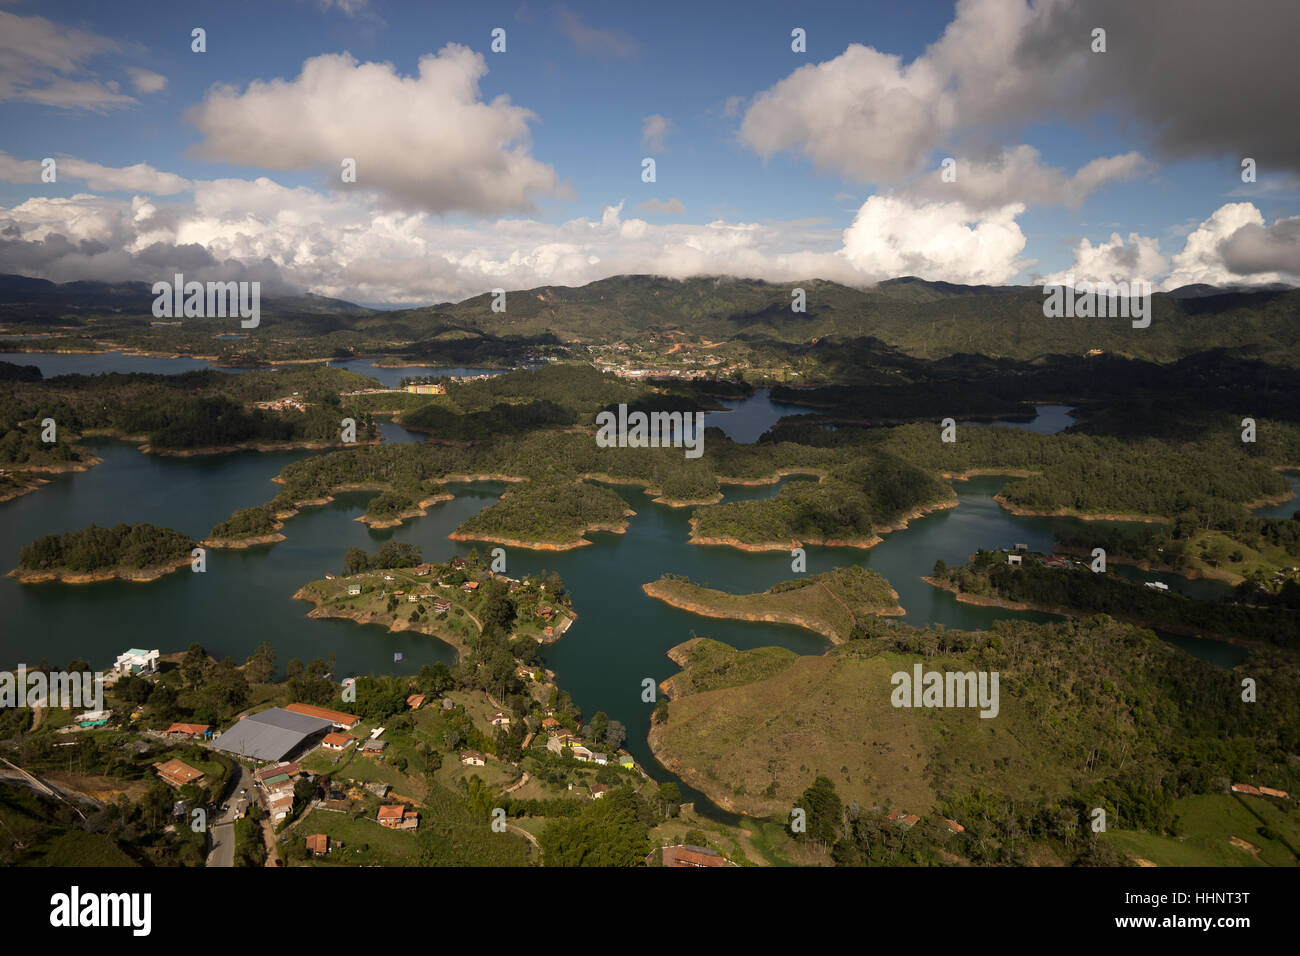 artificially created lake for hydroelectric energy production in Guatape Colombia seen from the top of the Penon rock Stock Photo